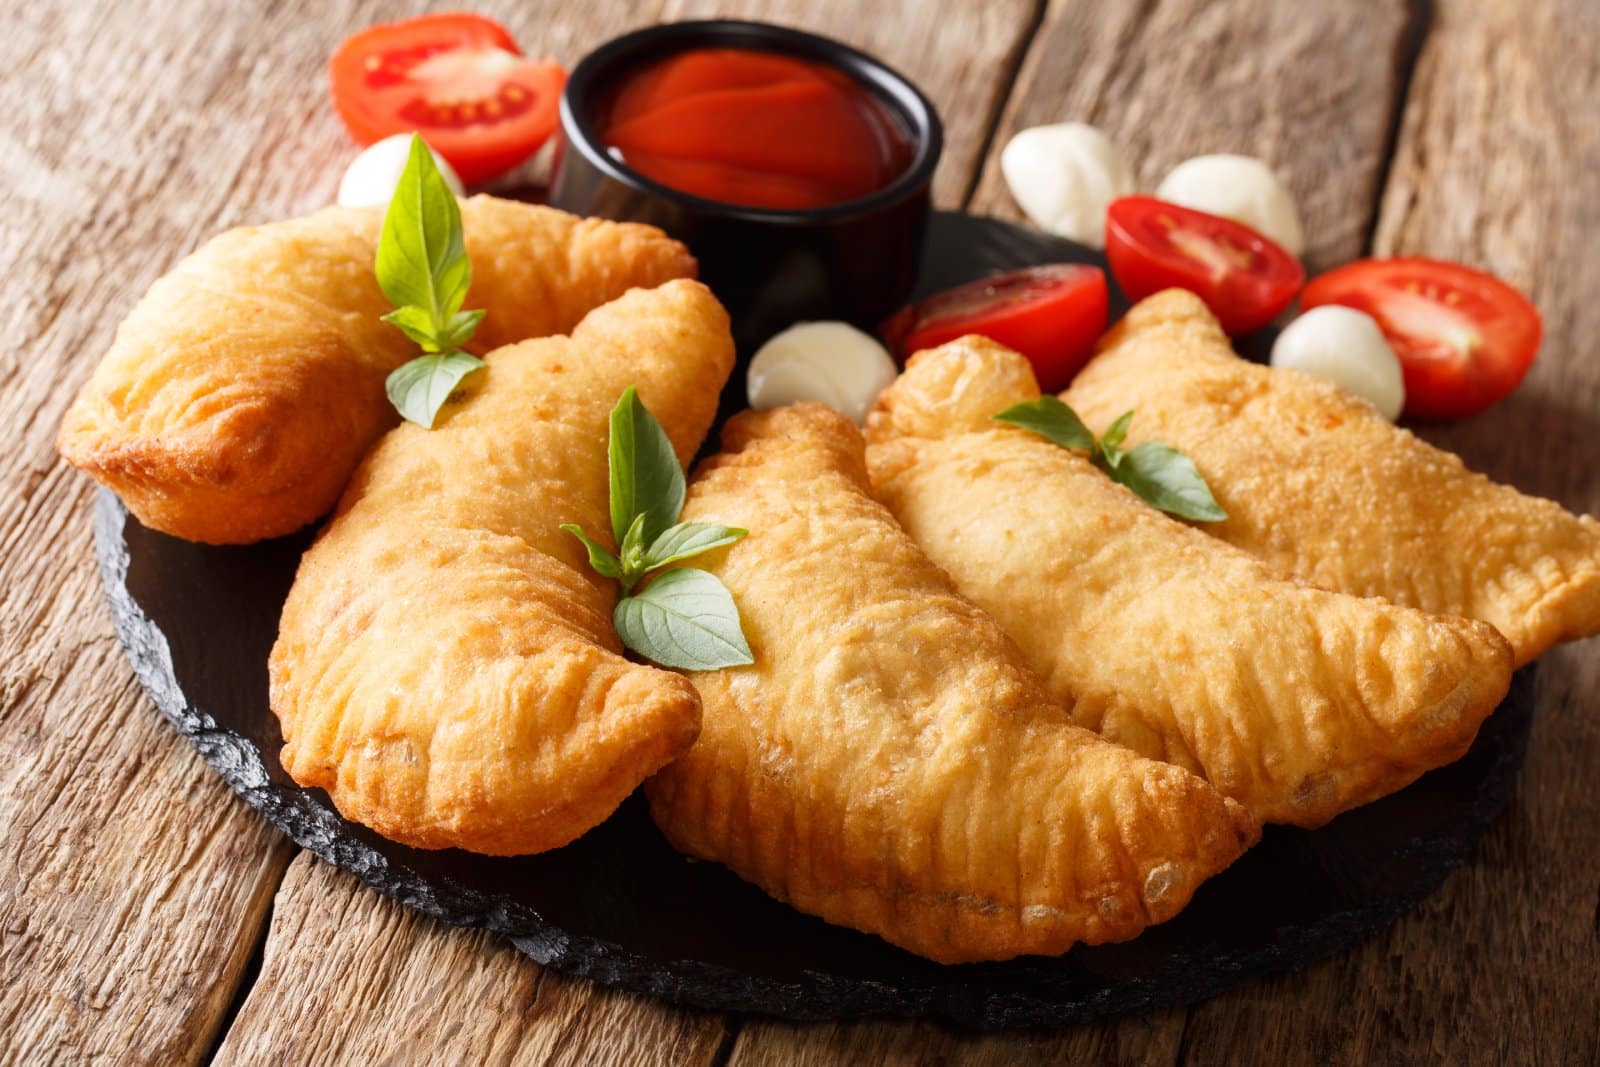 Image Credit: Shutterstock / AS Foodstudio <p><span>Treat yourself to panzerotti, a beloved street food from Bari, Puglia, reminiscent of a miniature calzone. These deep-fried pockets of dough are filled with a savory mixture of tomato, mozzarella, and your choice of fillings, ranging from spicy sausage to tender eggplant. Grab a few from a local bakery or street vendor and savor their crispy exterior and gooey center as you explore the historic streets of Bari.</span></p>